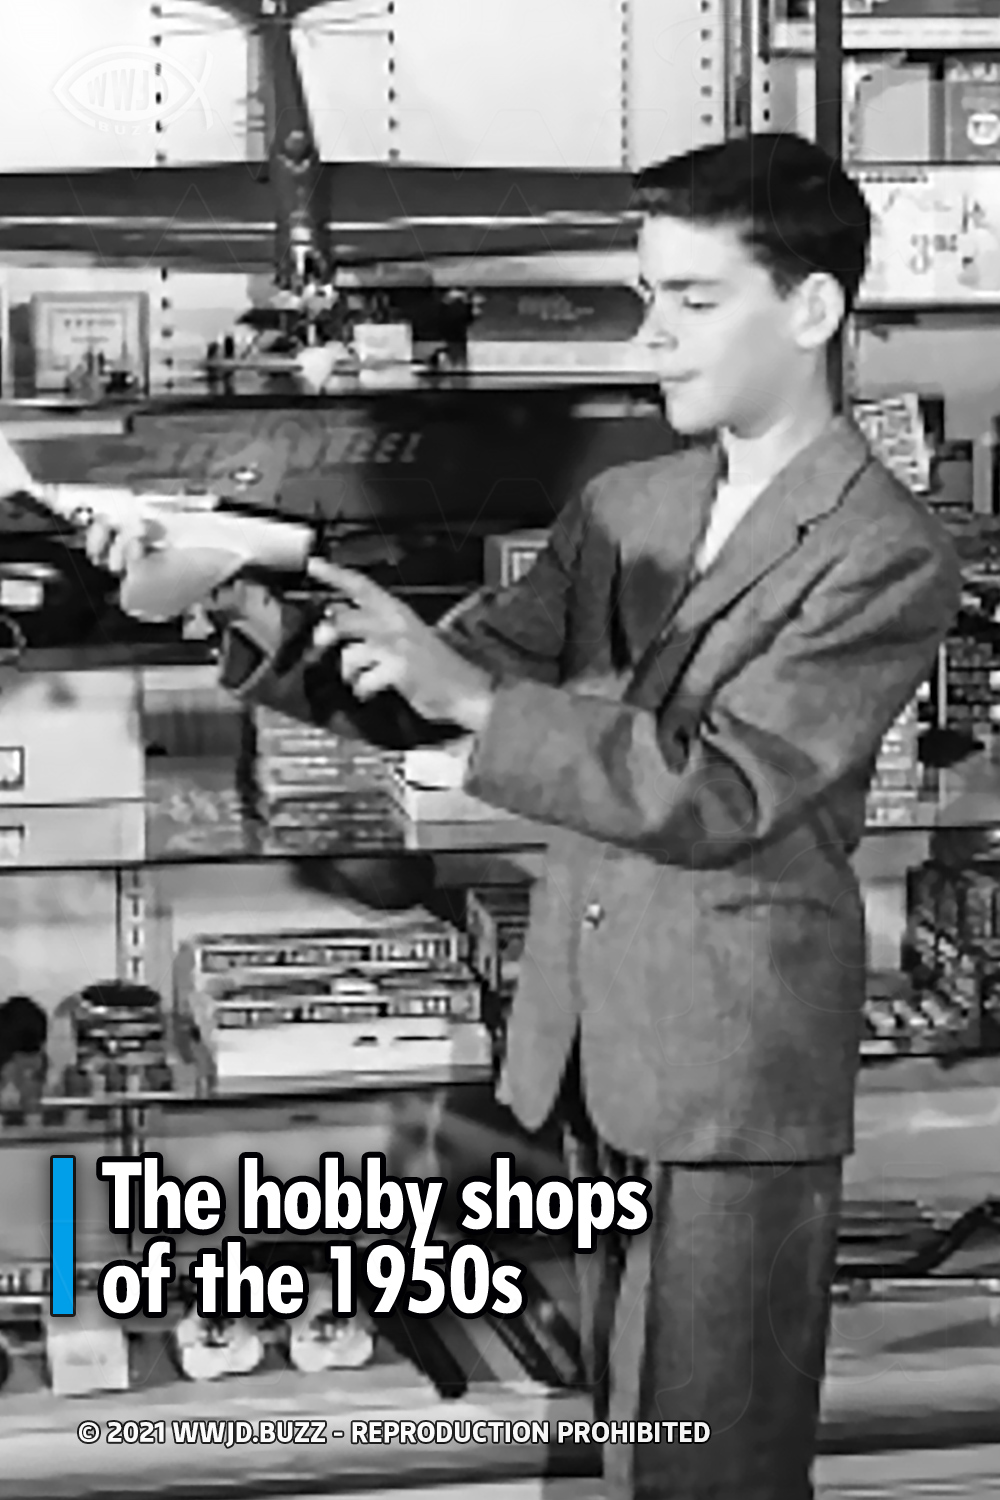 The hobby shops of the 1950s